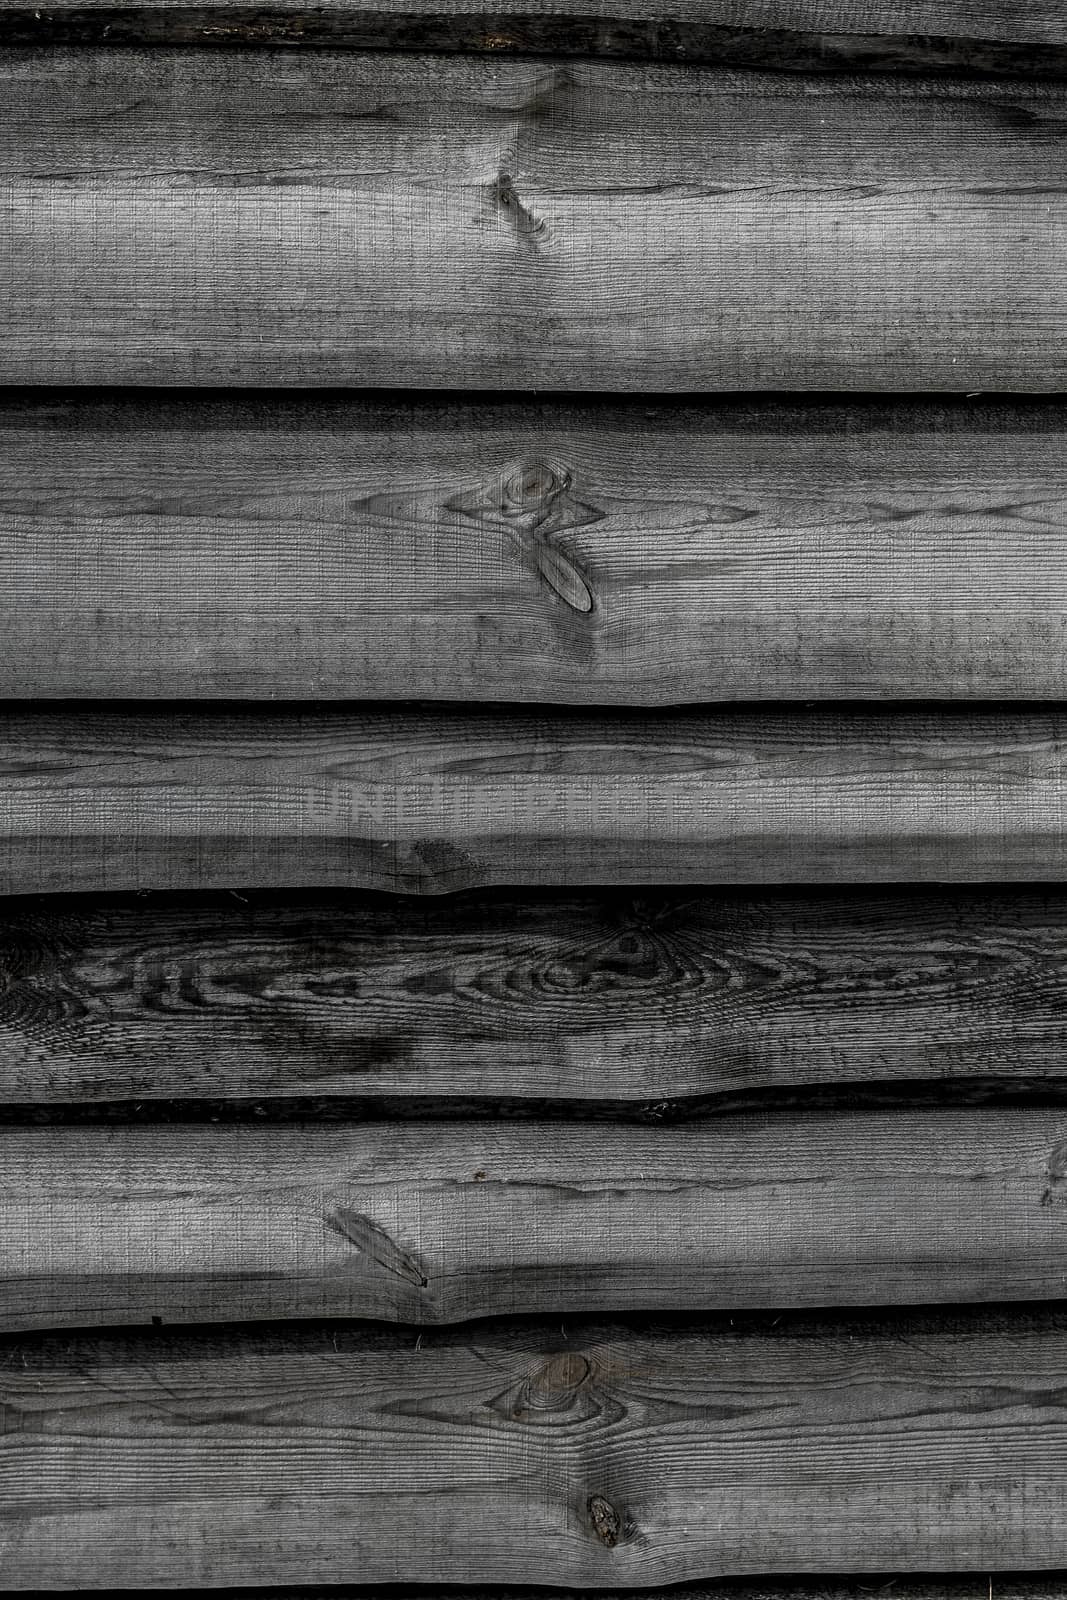 Black wooden boards vertical background. Wall floor or fence exterior design. Natural wood material backdrop